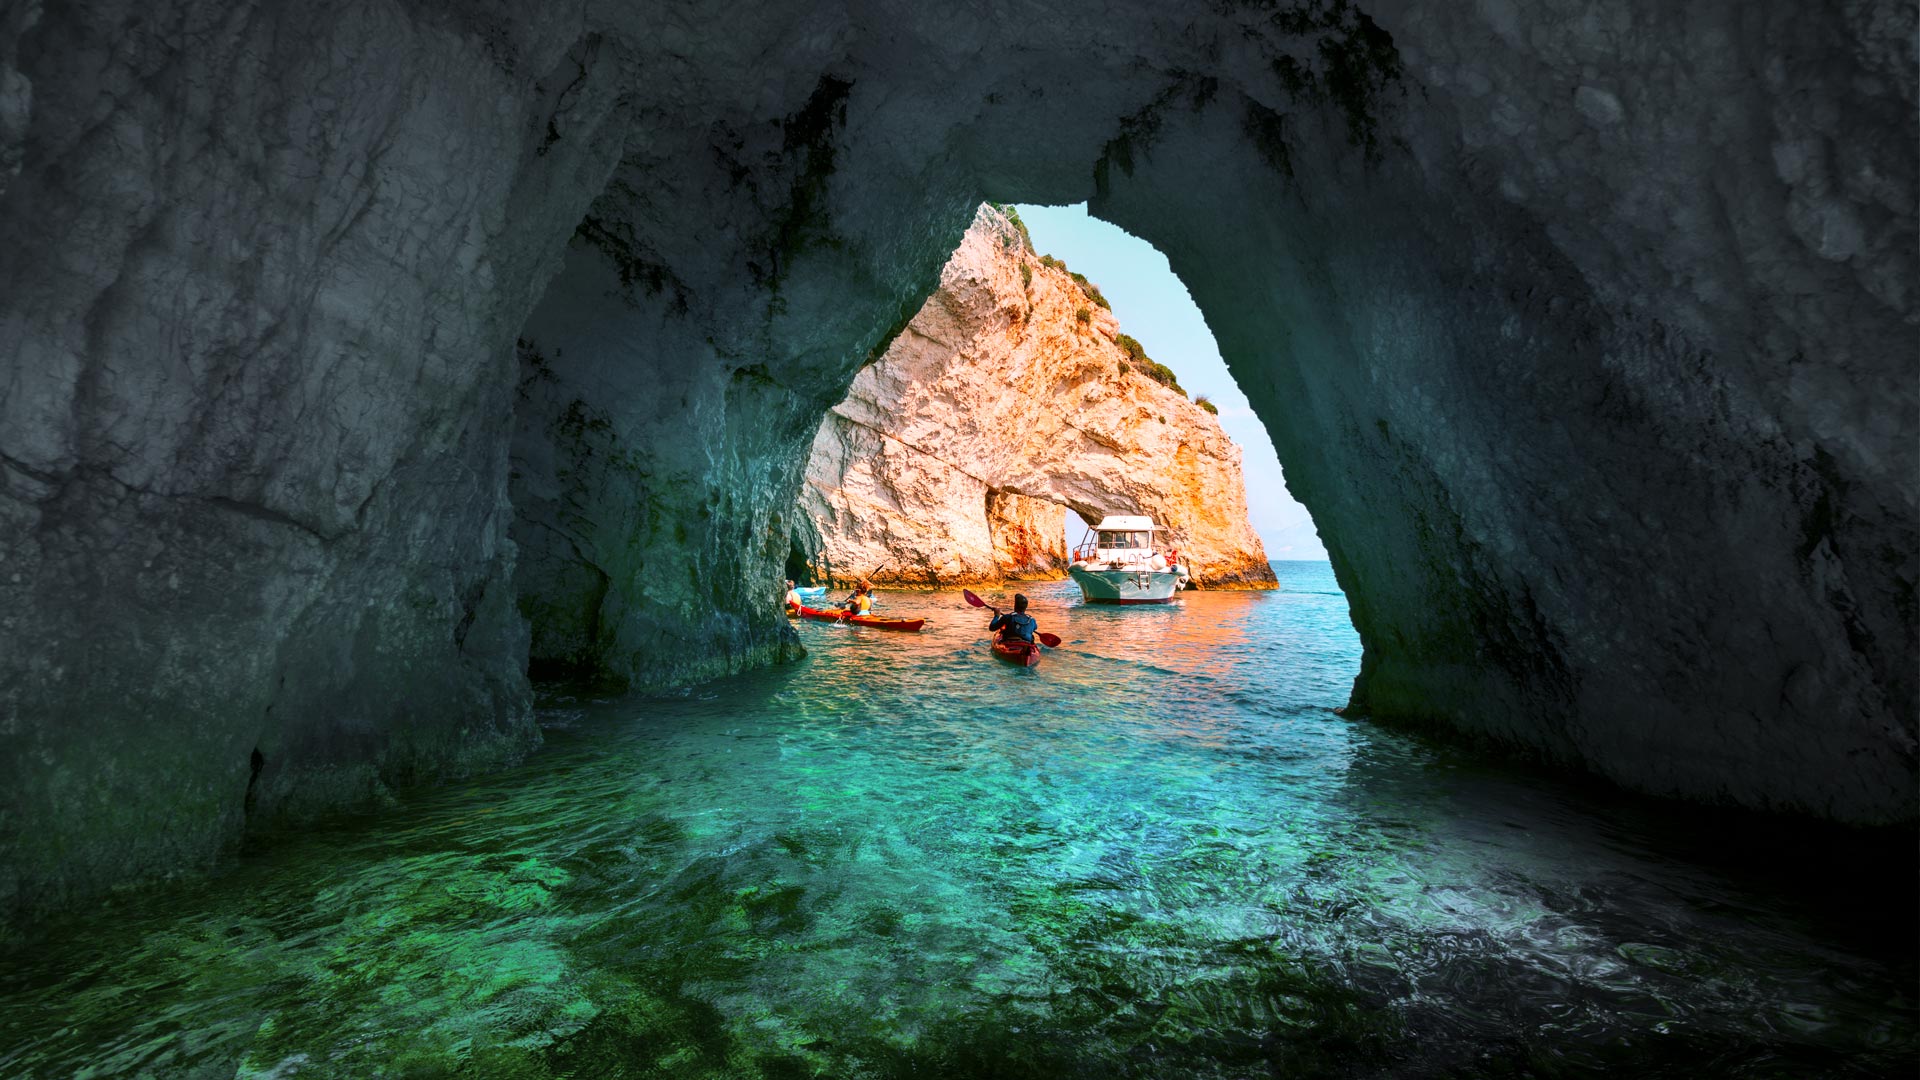 Sea kayaking offers a unique water-level appreciation of Zakynthos’ extraordinary Blue Caves